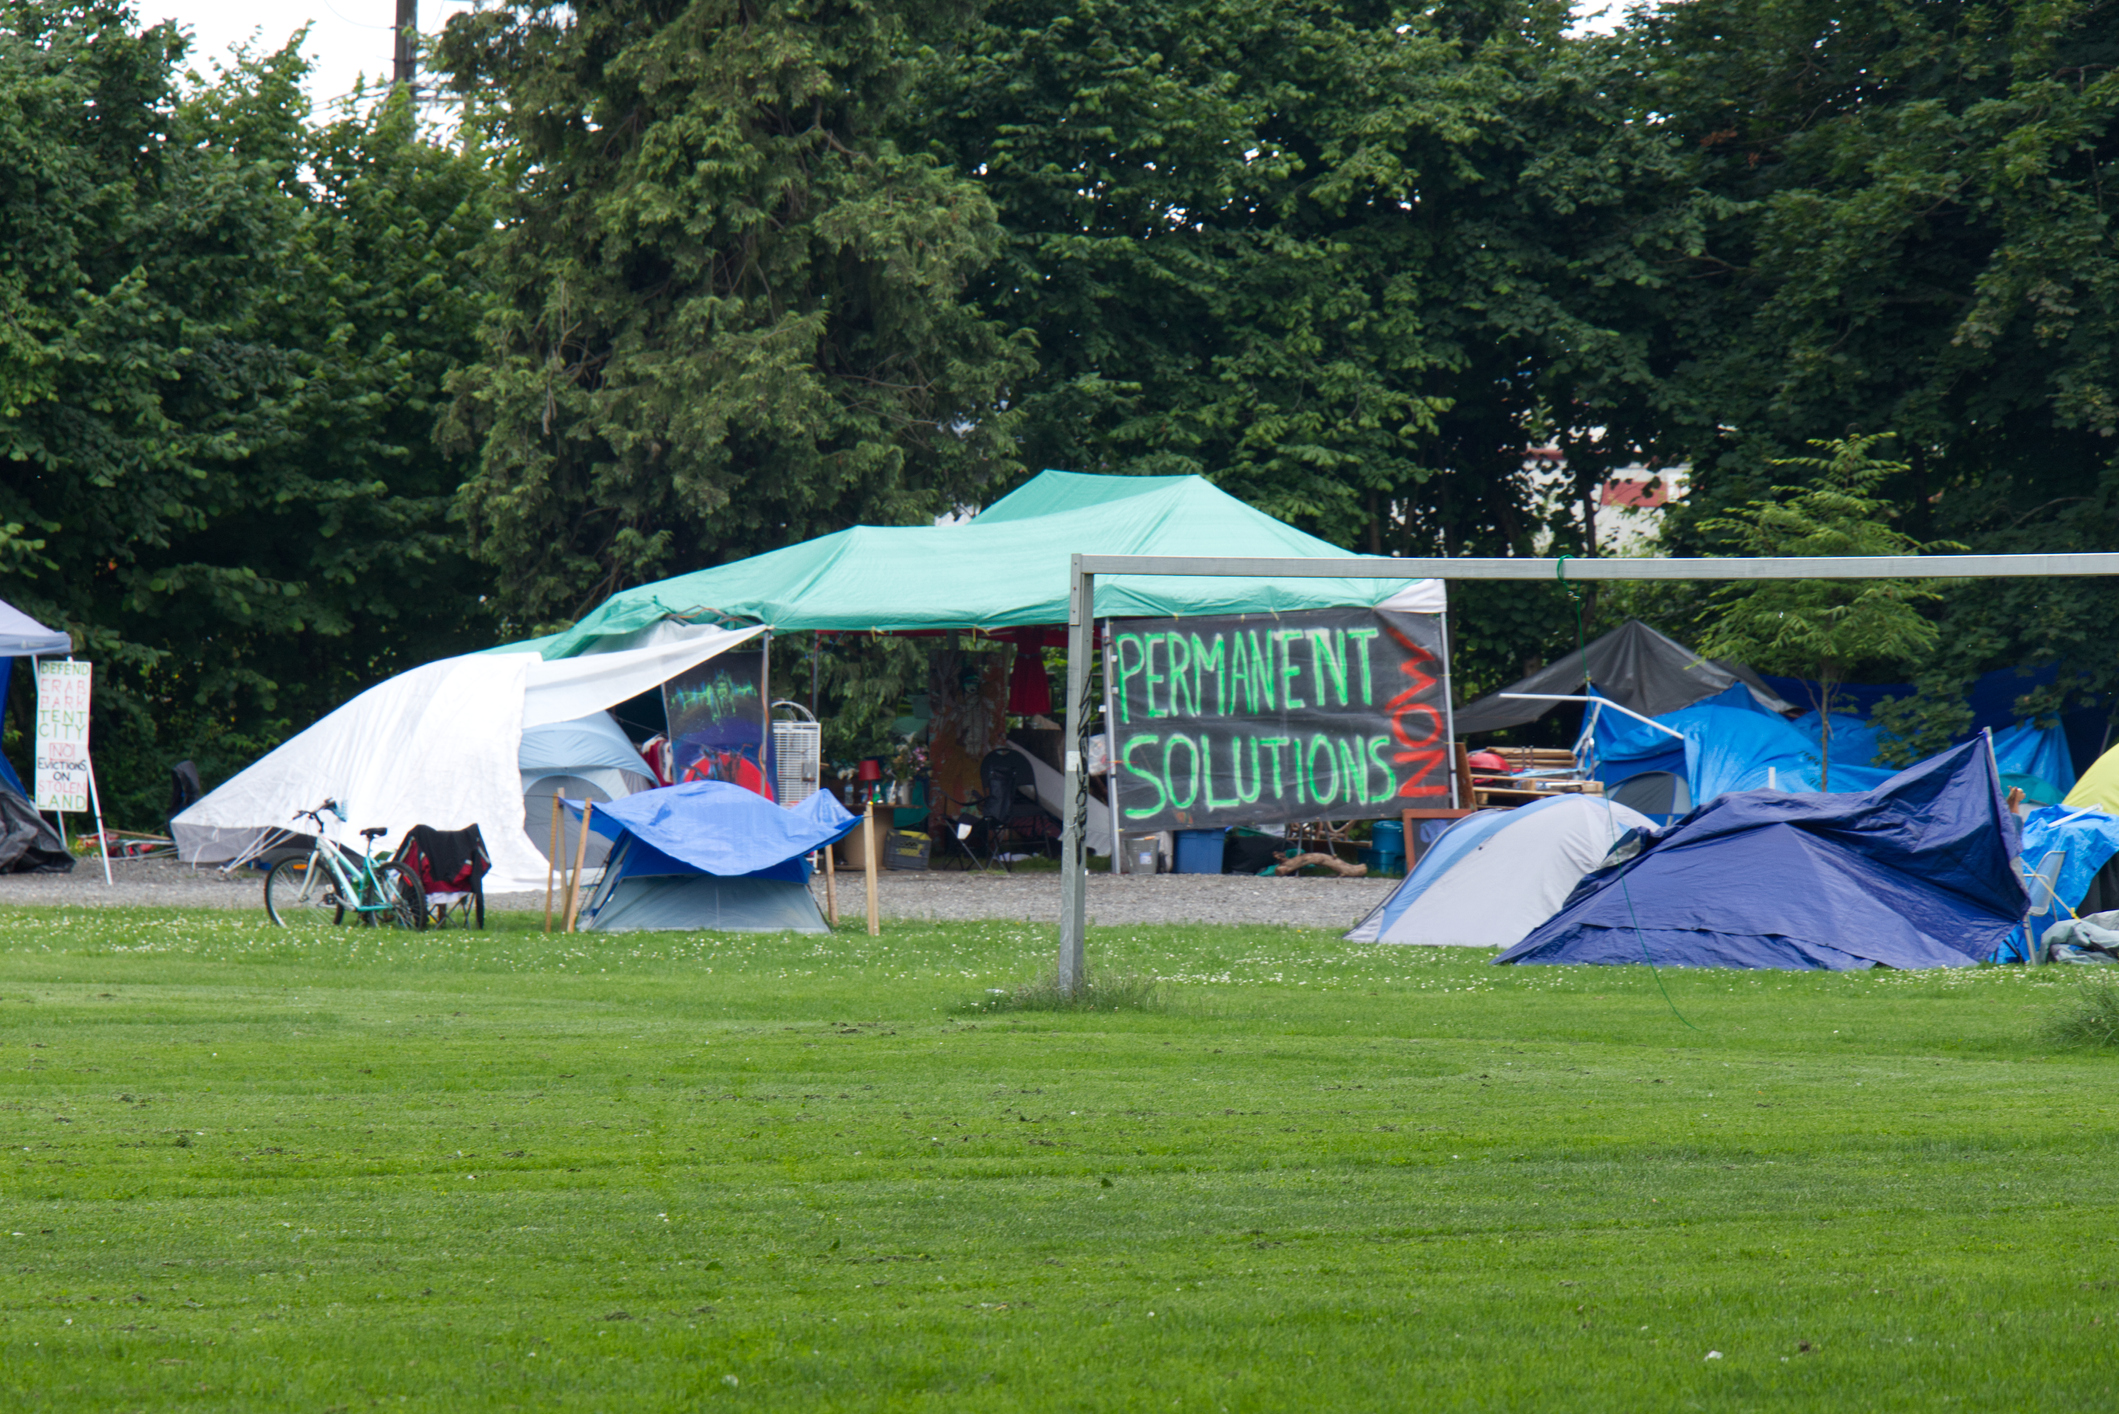 Vancouver, Canada - July 4, 2020: View of Strathcona Park in downtown Vancouver full of tents and homeless people with sign "Permanent solutions now" in the background